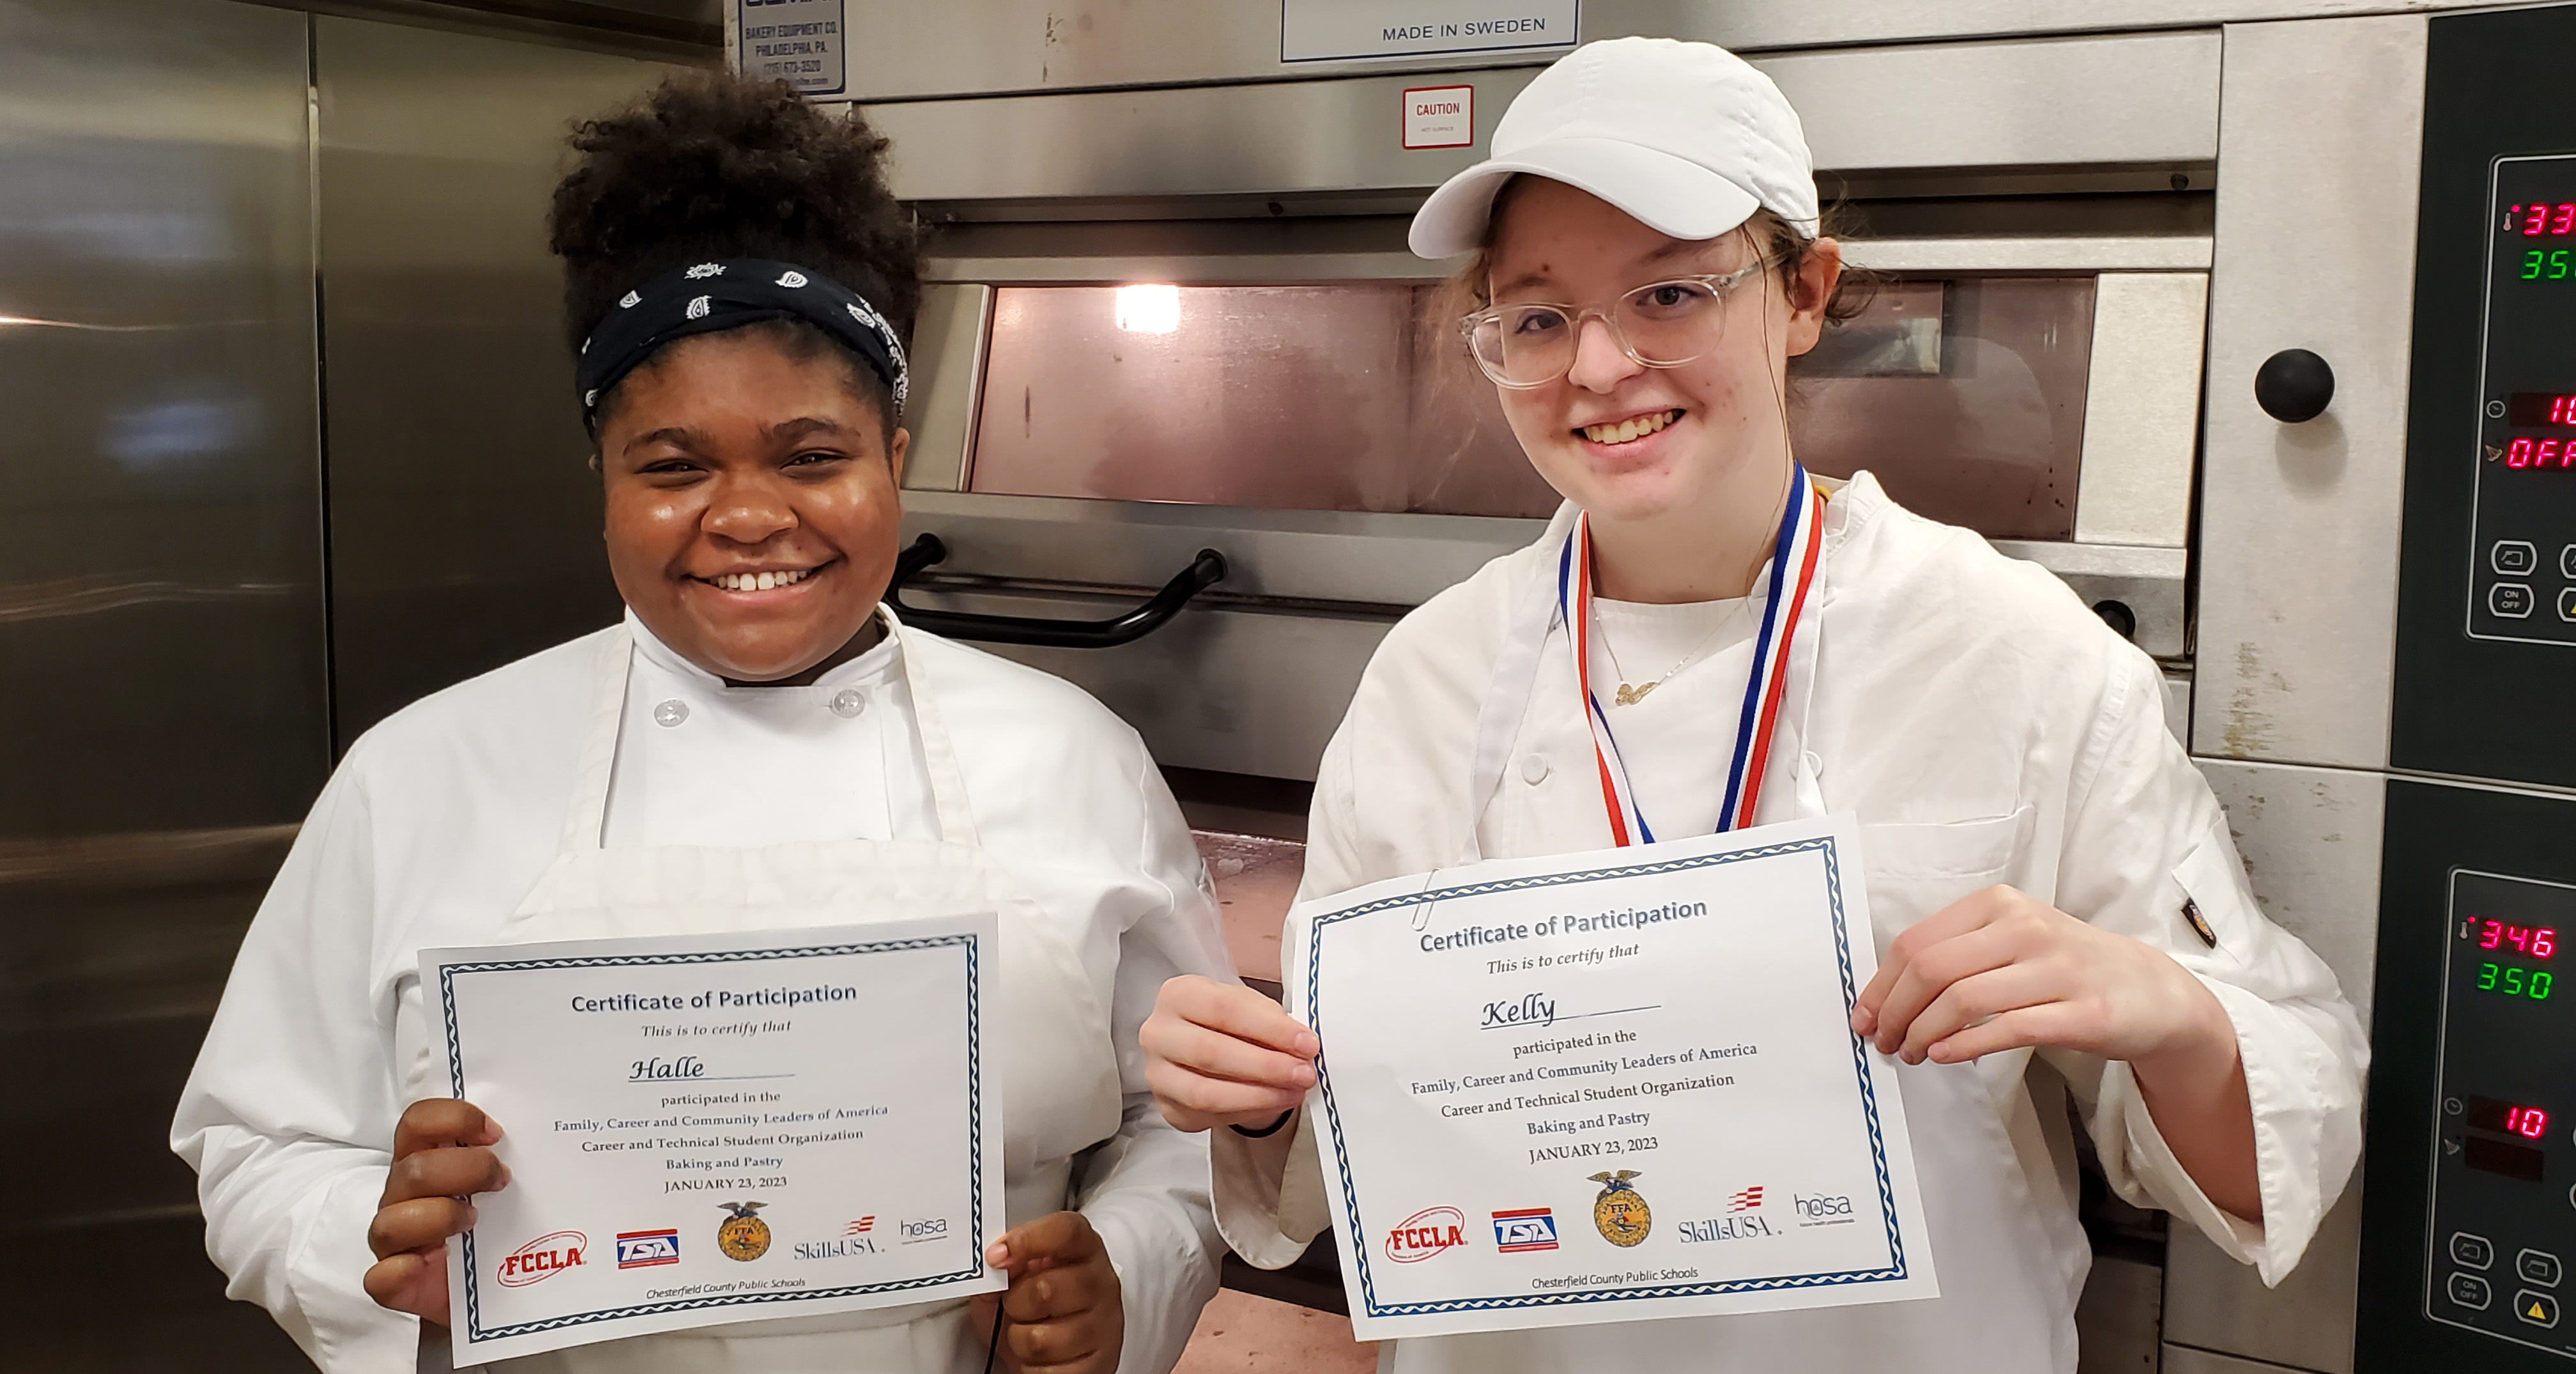 Two culinary students holding a certificate